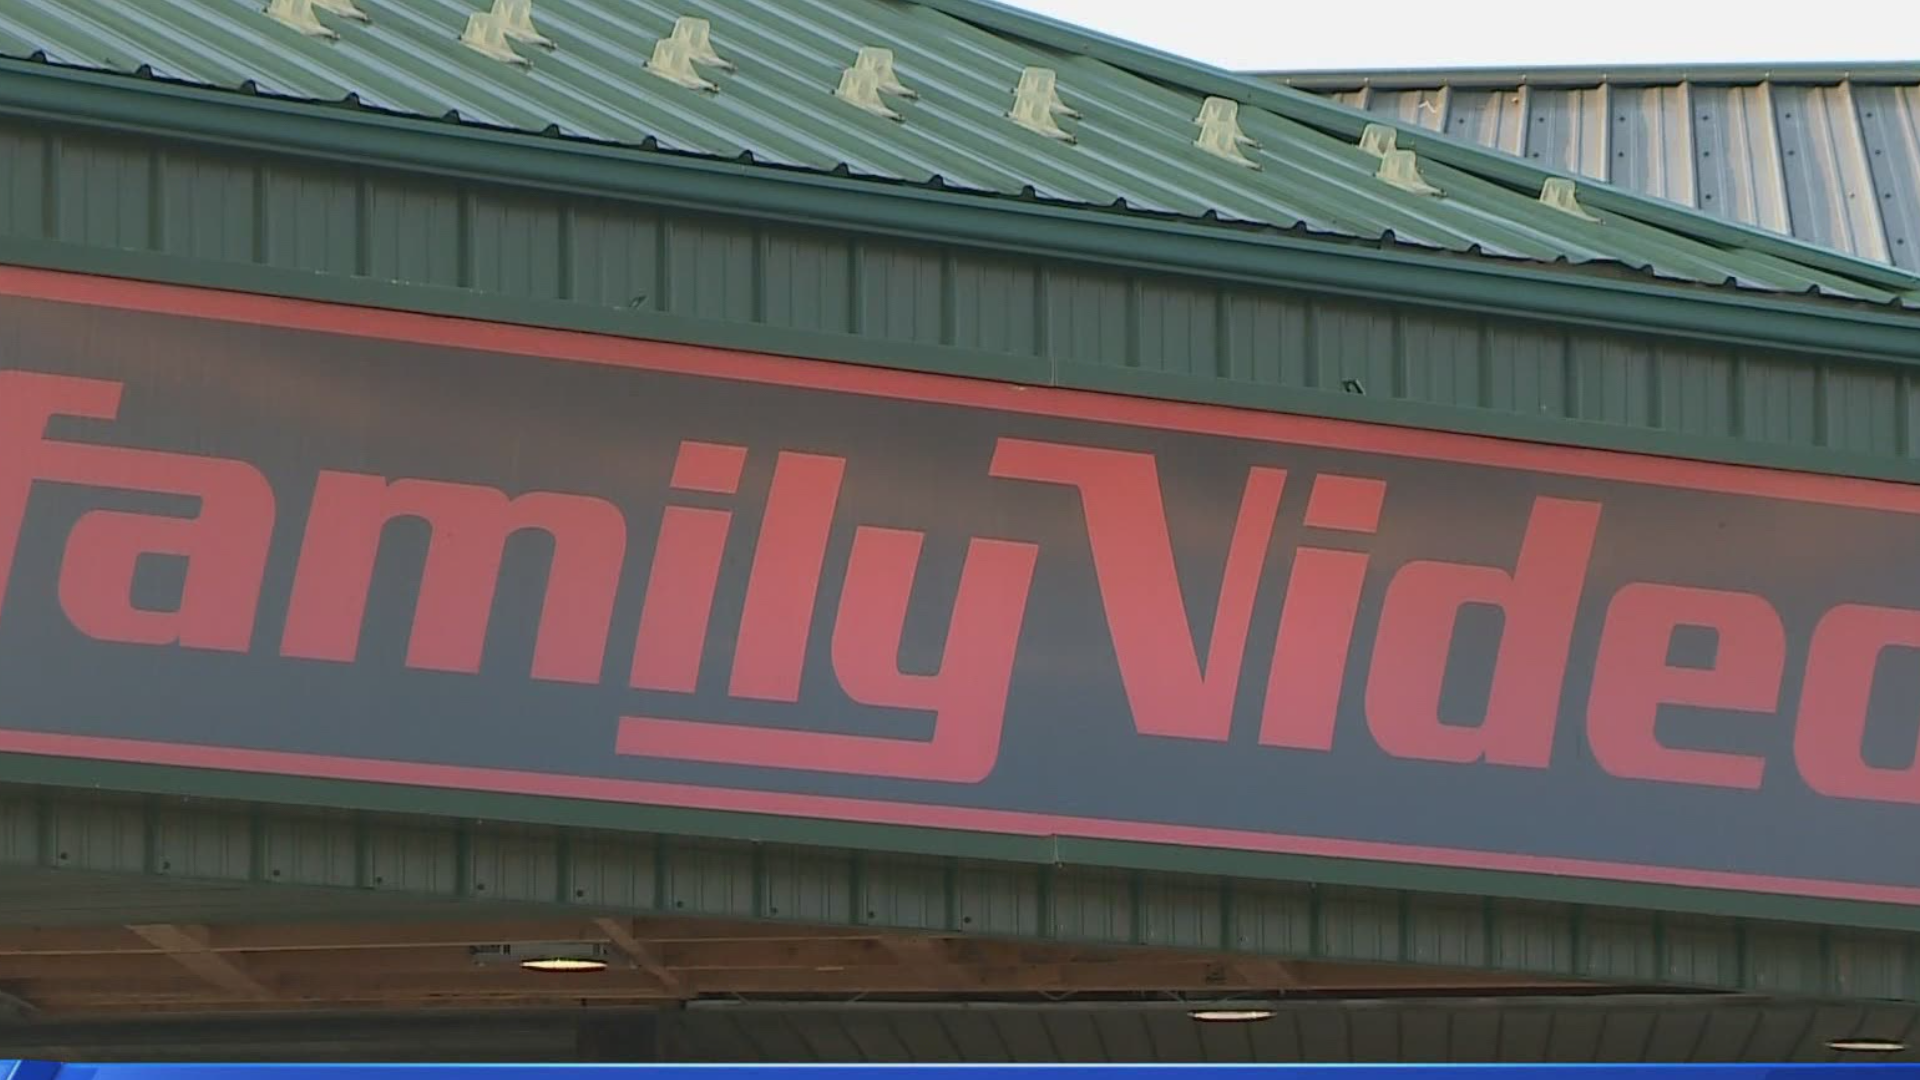 Family Video told Local 5 they are closing a number of their stores in Iowa, including some in the Des Moines metro.